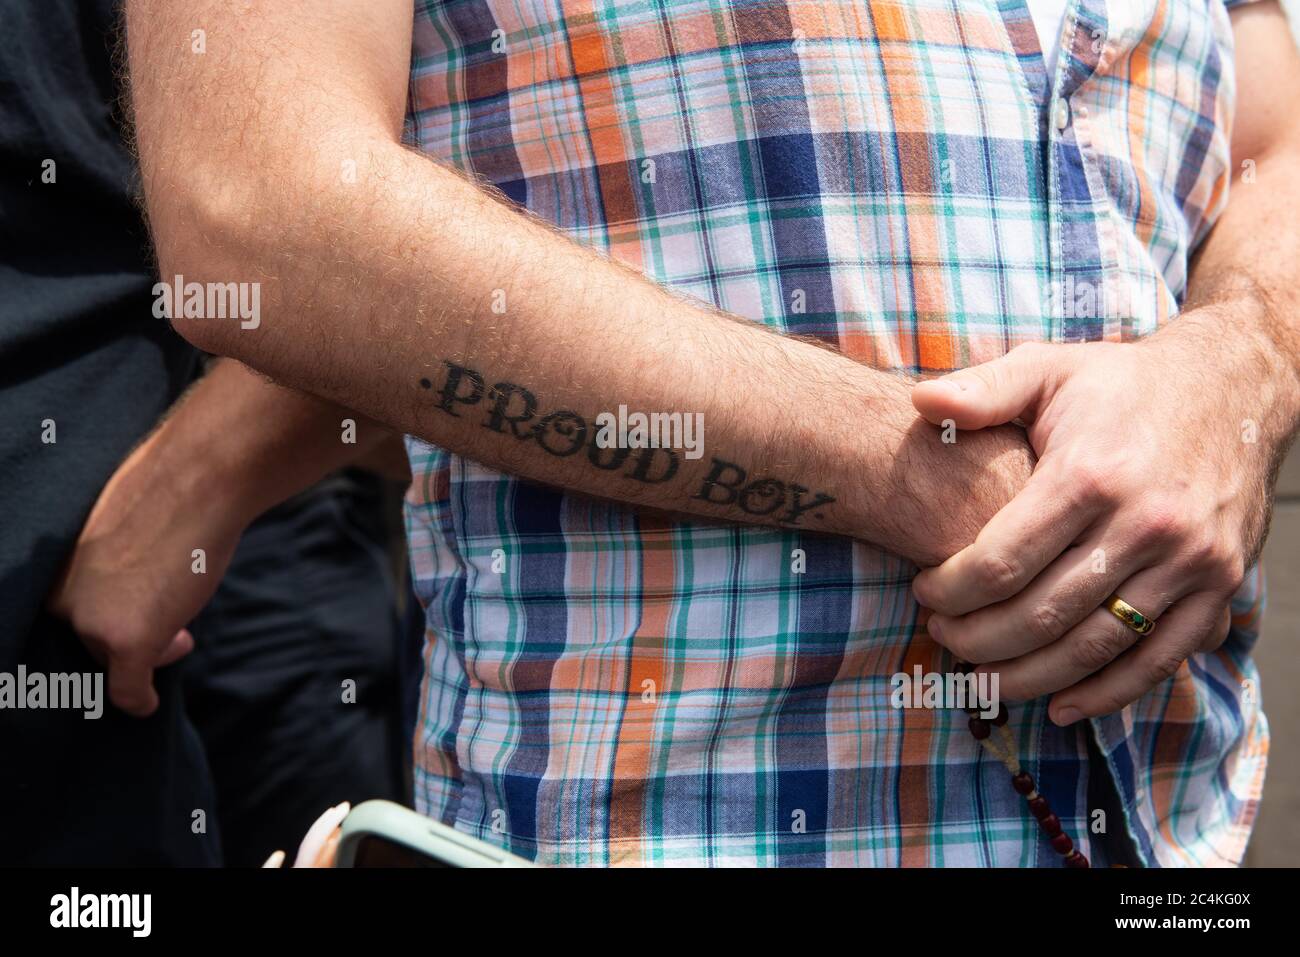 Saint Louis, Missouri, USA. 27th June, 2020. A man with a ''Proud Boys''  tattoo observes a protest calling for the statue of St. Louis to be removed  from Forest Park. Credit: James